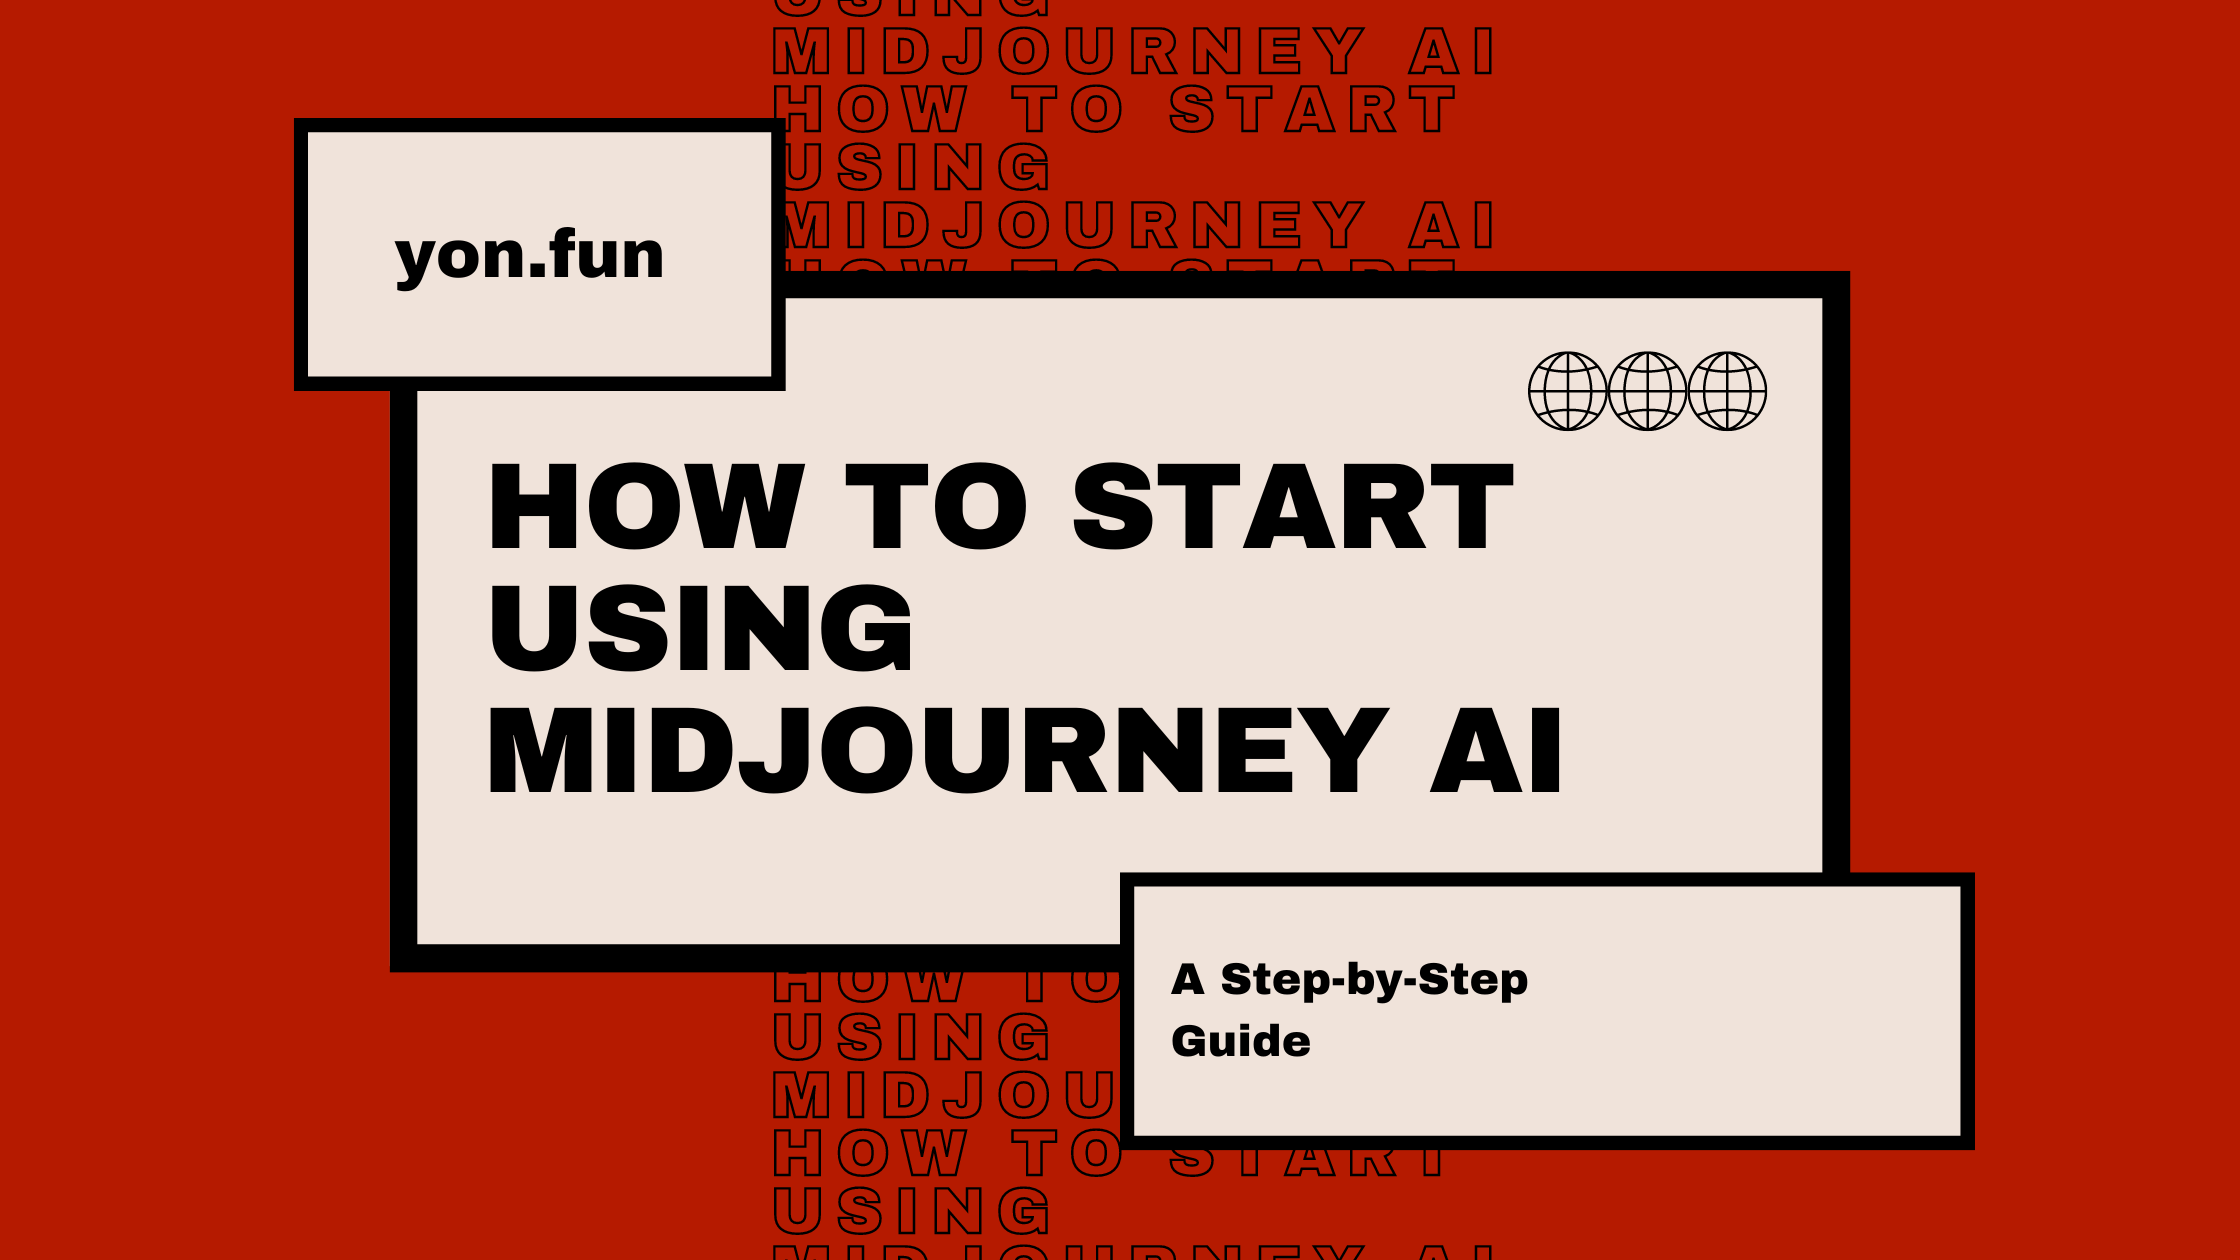 How to Use Midjourney AI: A Step-by-Step Guide